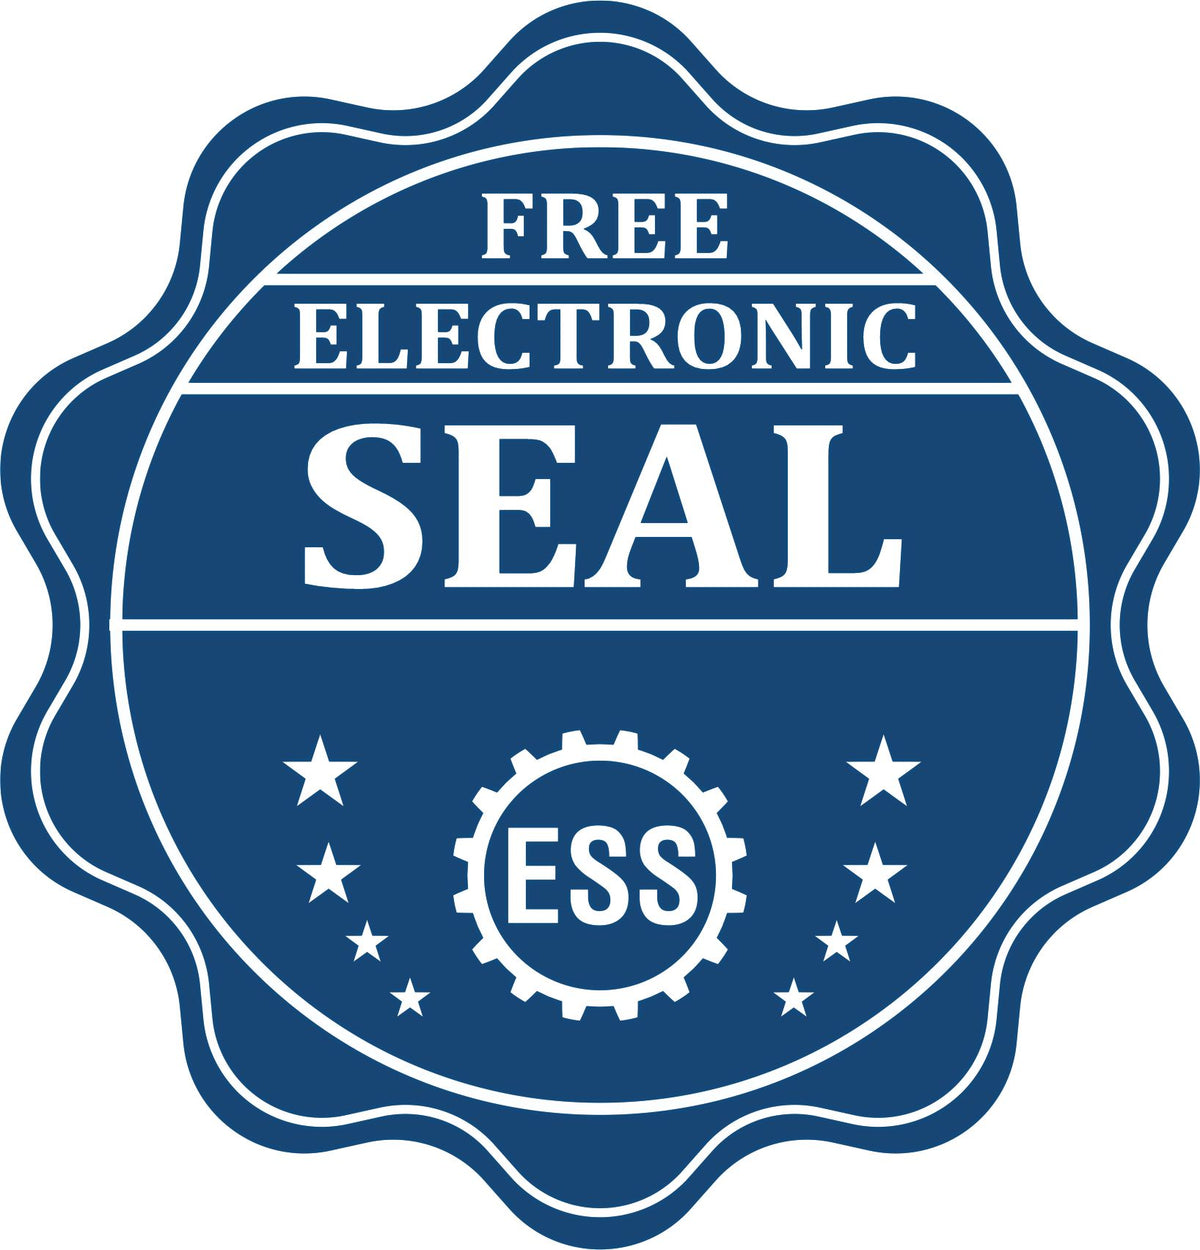 A badge showing a free electronic seal for the Gift Florida Land Surveyor Seal with stars and the ESS gear on the emblem.